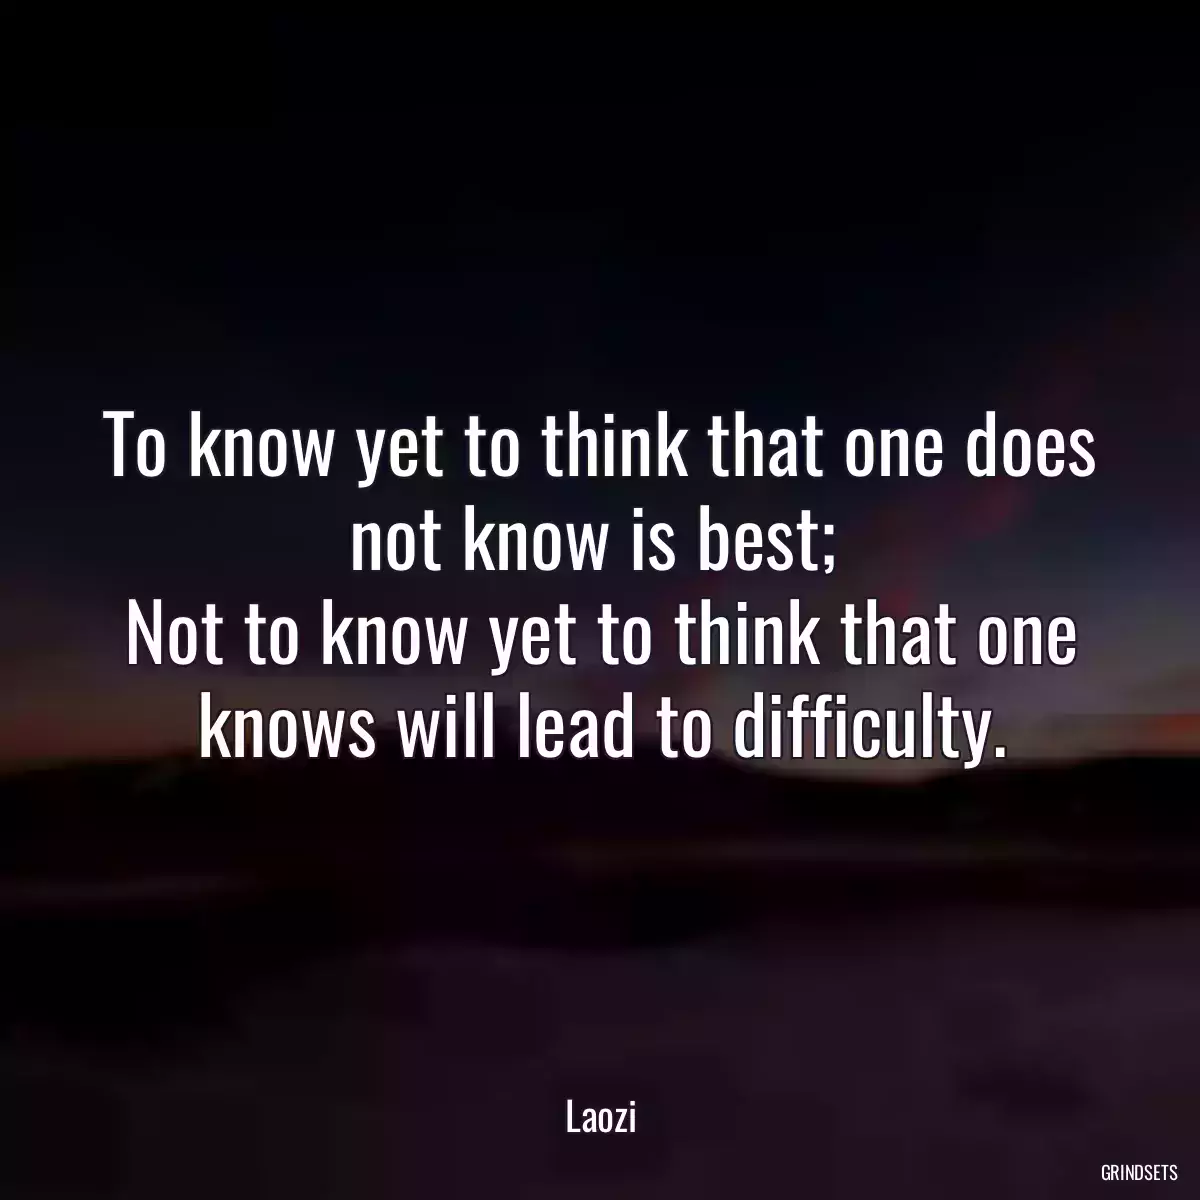 To know yet to think that one does not know is best; 
Not to know yet to think that one knows will lead to difficulty.